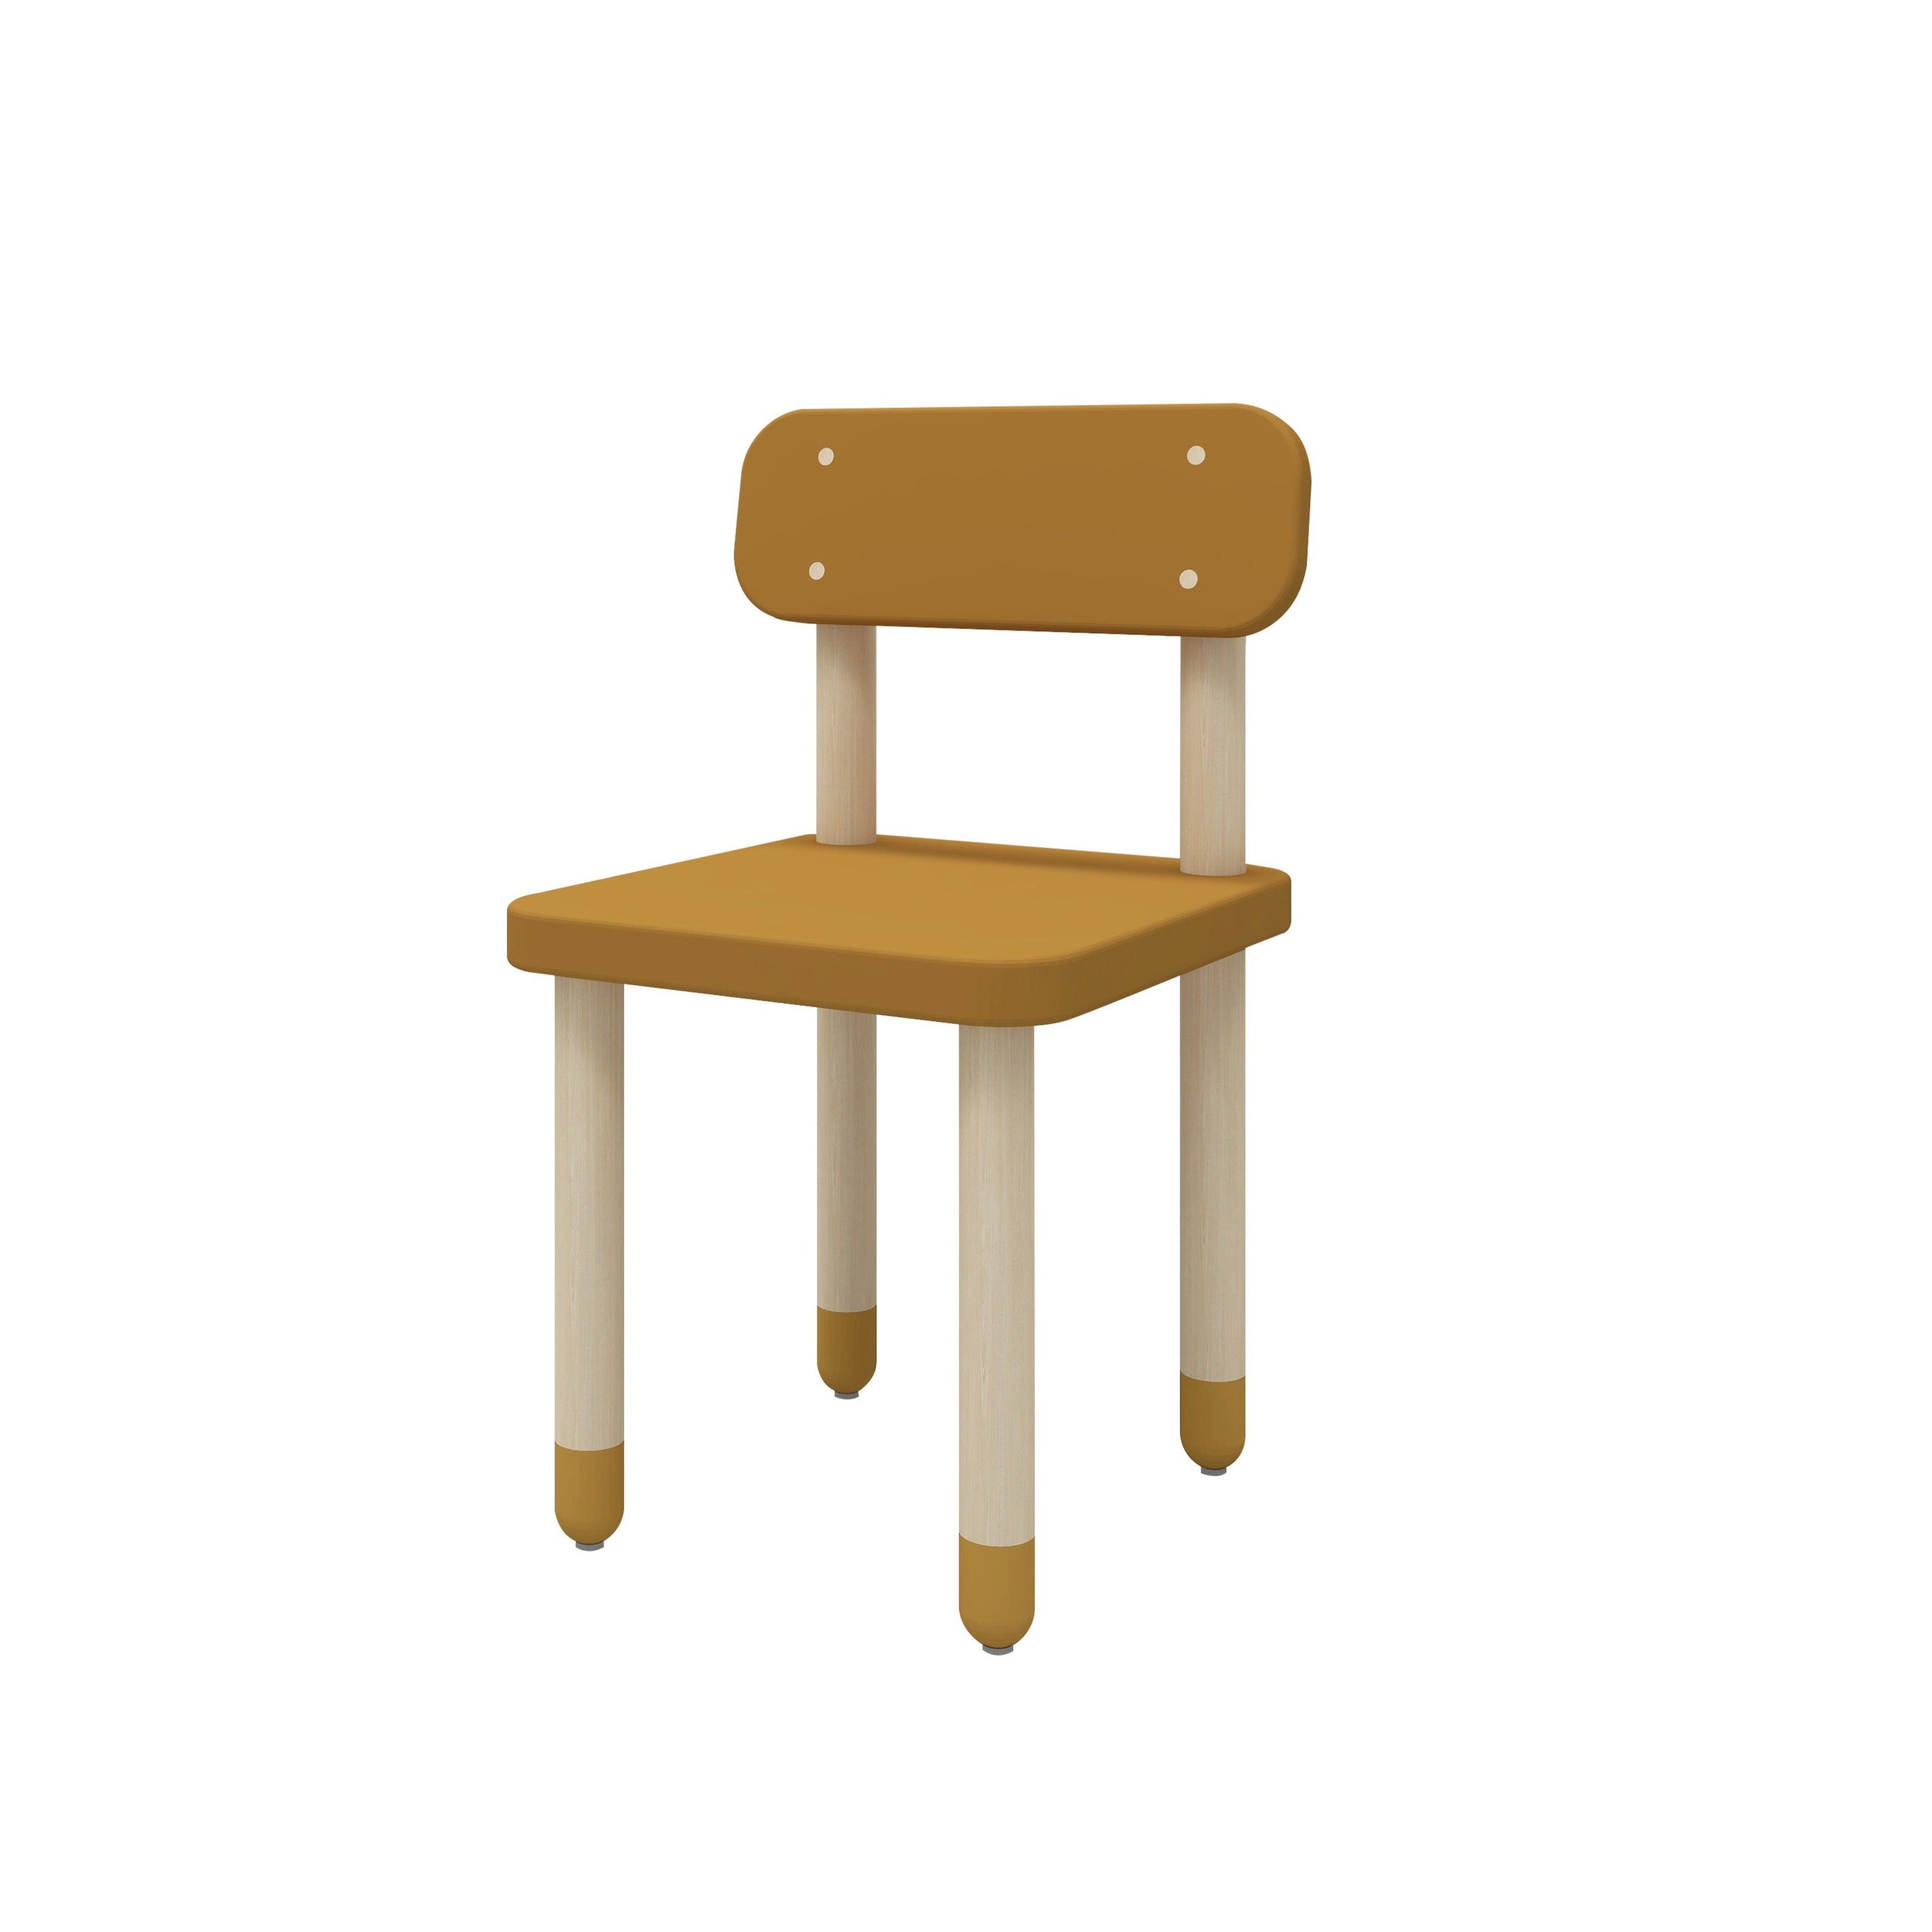 Flexa Dots Chair with Backrest in Mustard